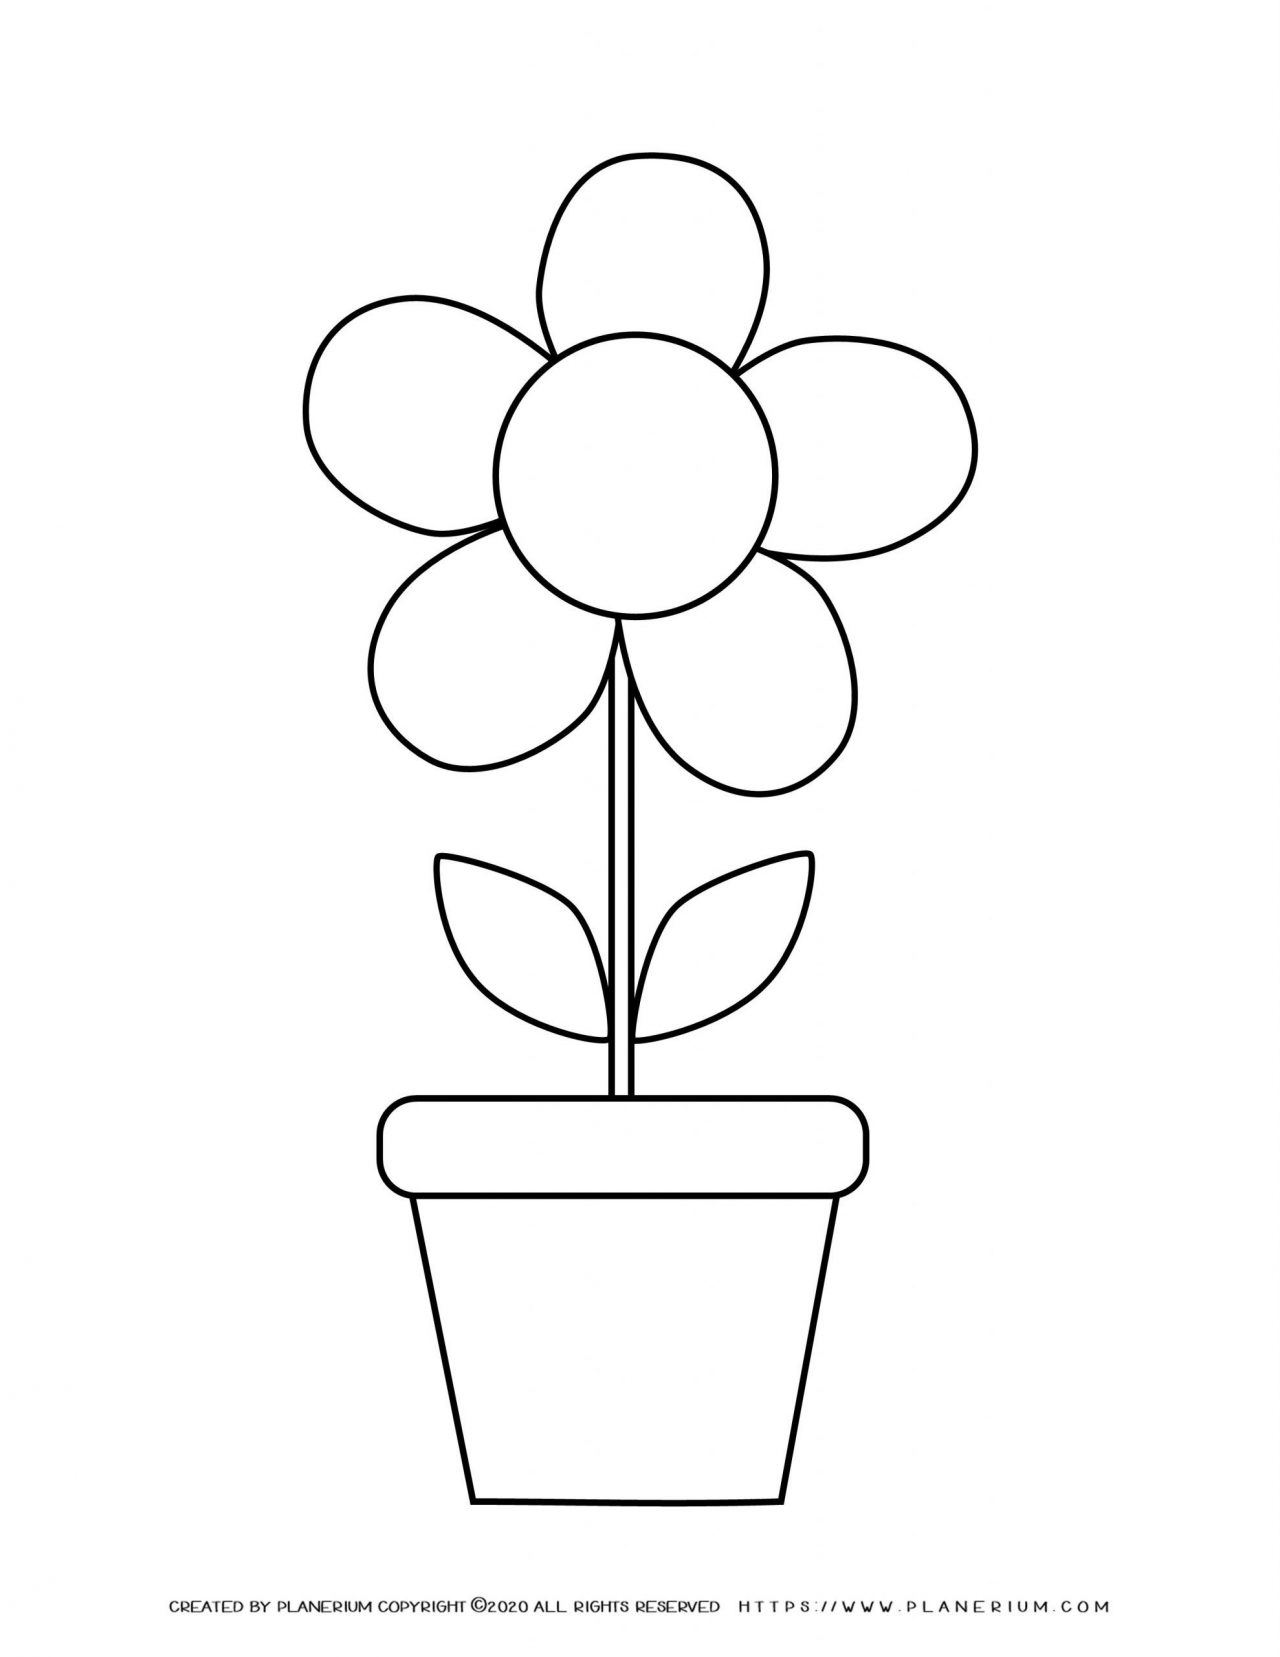 Spring   Coloring Page   Flower In A Pot   Planerium   Coloring Home